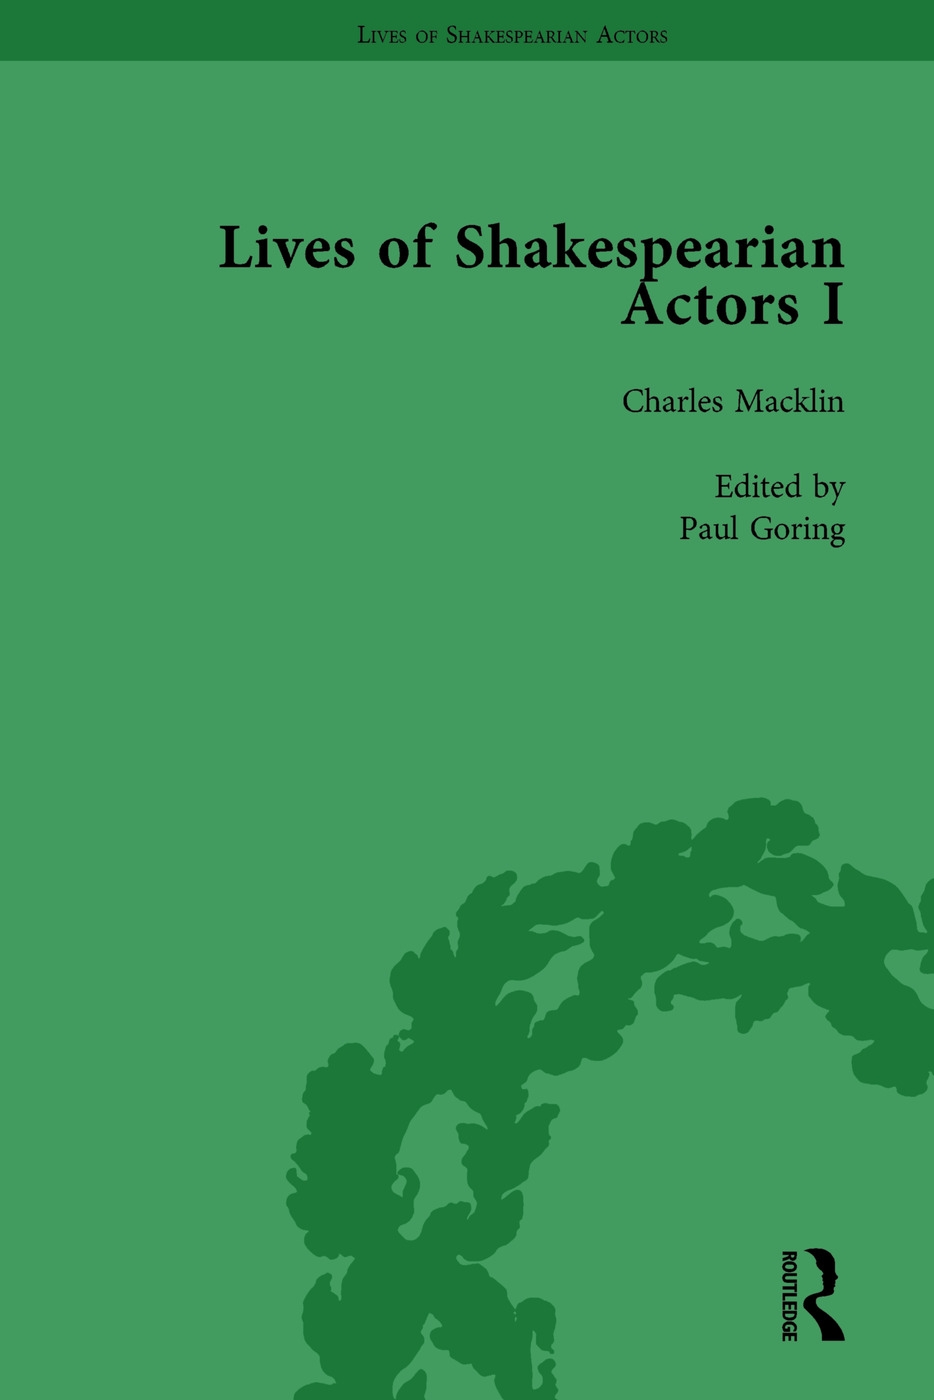 Lives of Shakespearian Actors, Part I, Volume 2: David Garrick, Charles Macklin and Margaret Woffington by Their Contemporaries